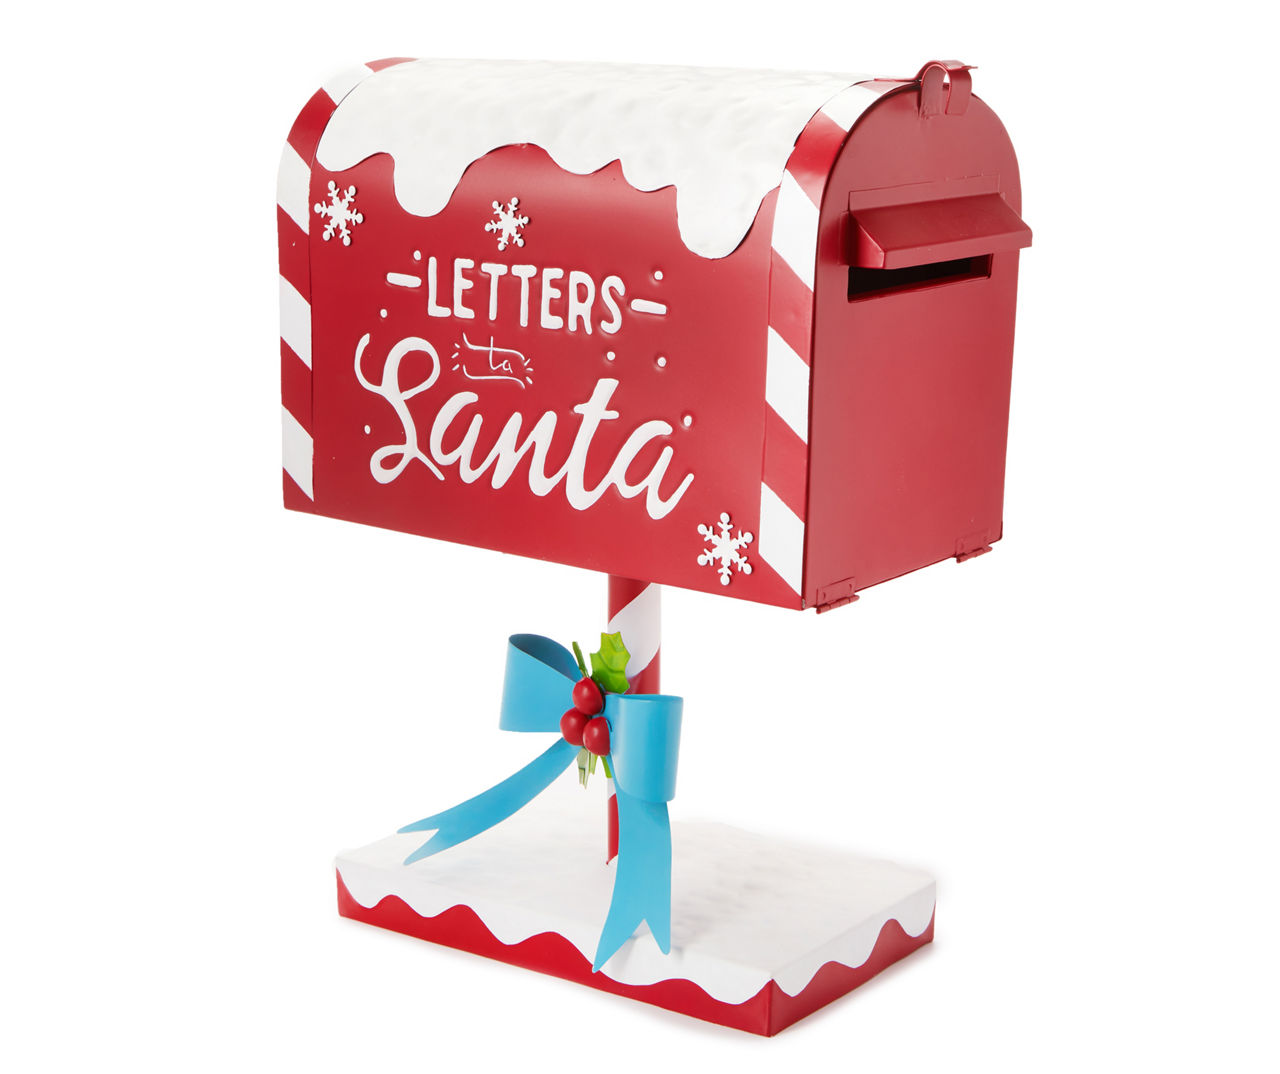 Letters for Santa Red Mailbox with Snow, D Gulin Framed Canvas Print